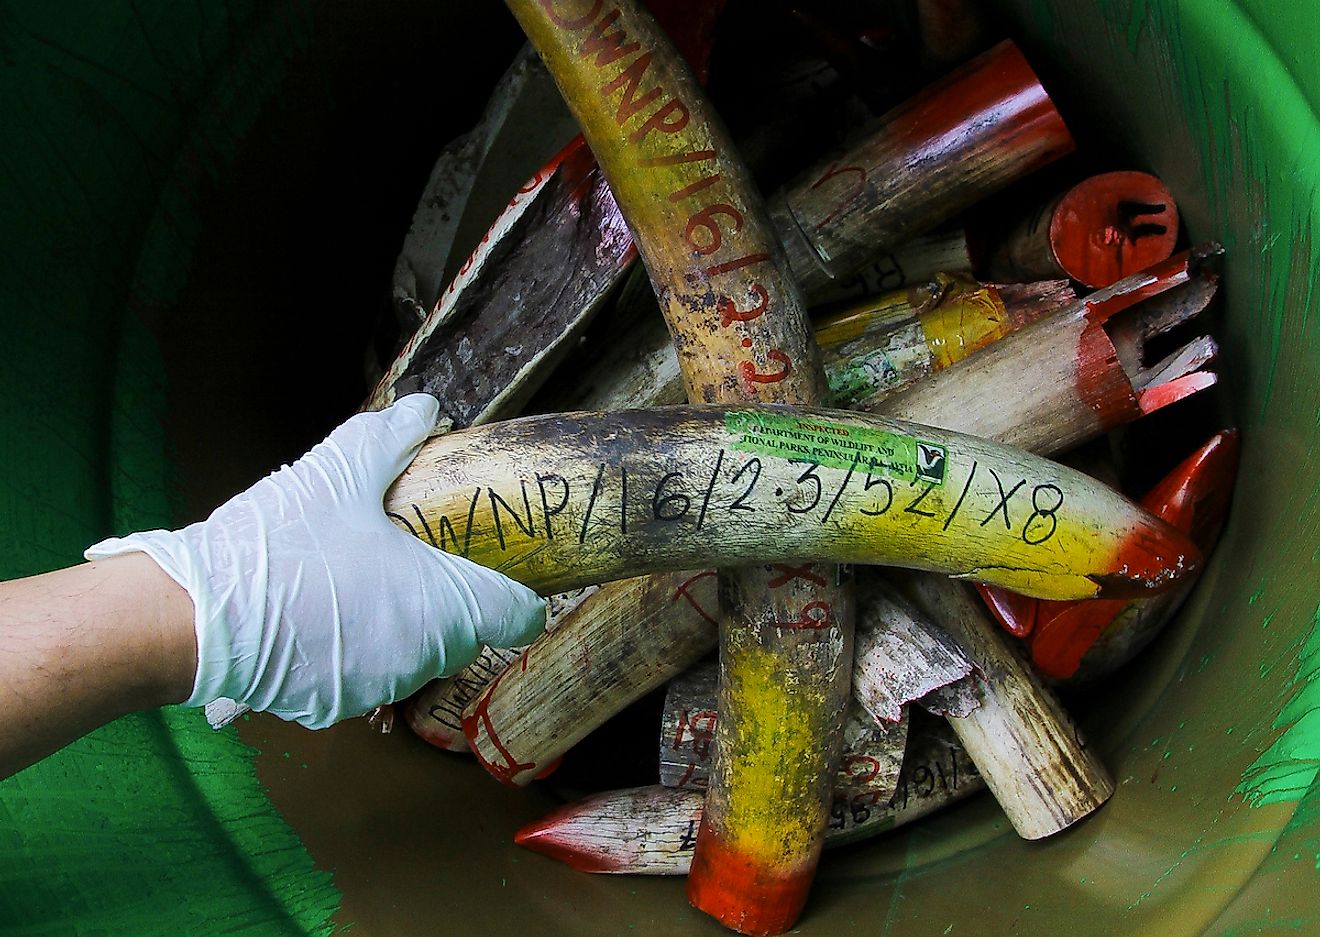 Negri Sembilan, Malaysia - 30 April 2019 : Seized ivory tusk are displayed before being destroyed as part of the government's fight against the illegal ivory trade. Image credit: Editorial credit: MIFAS / Shutterstock.com